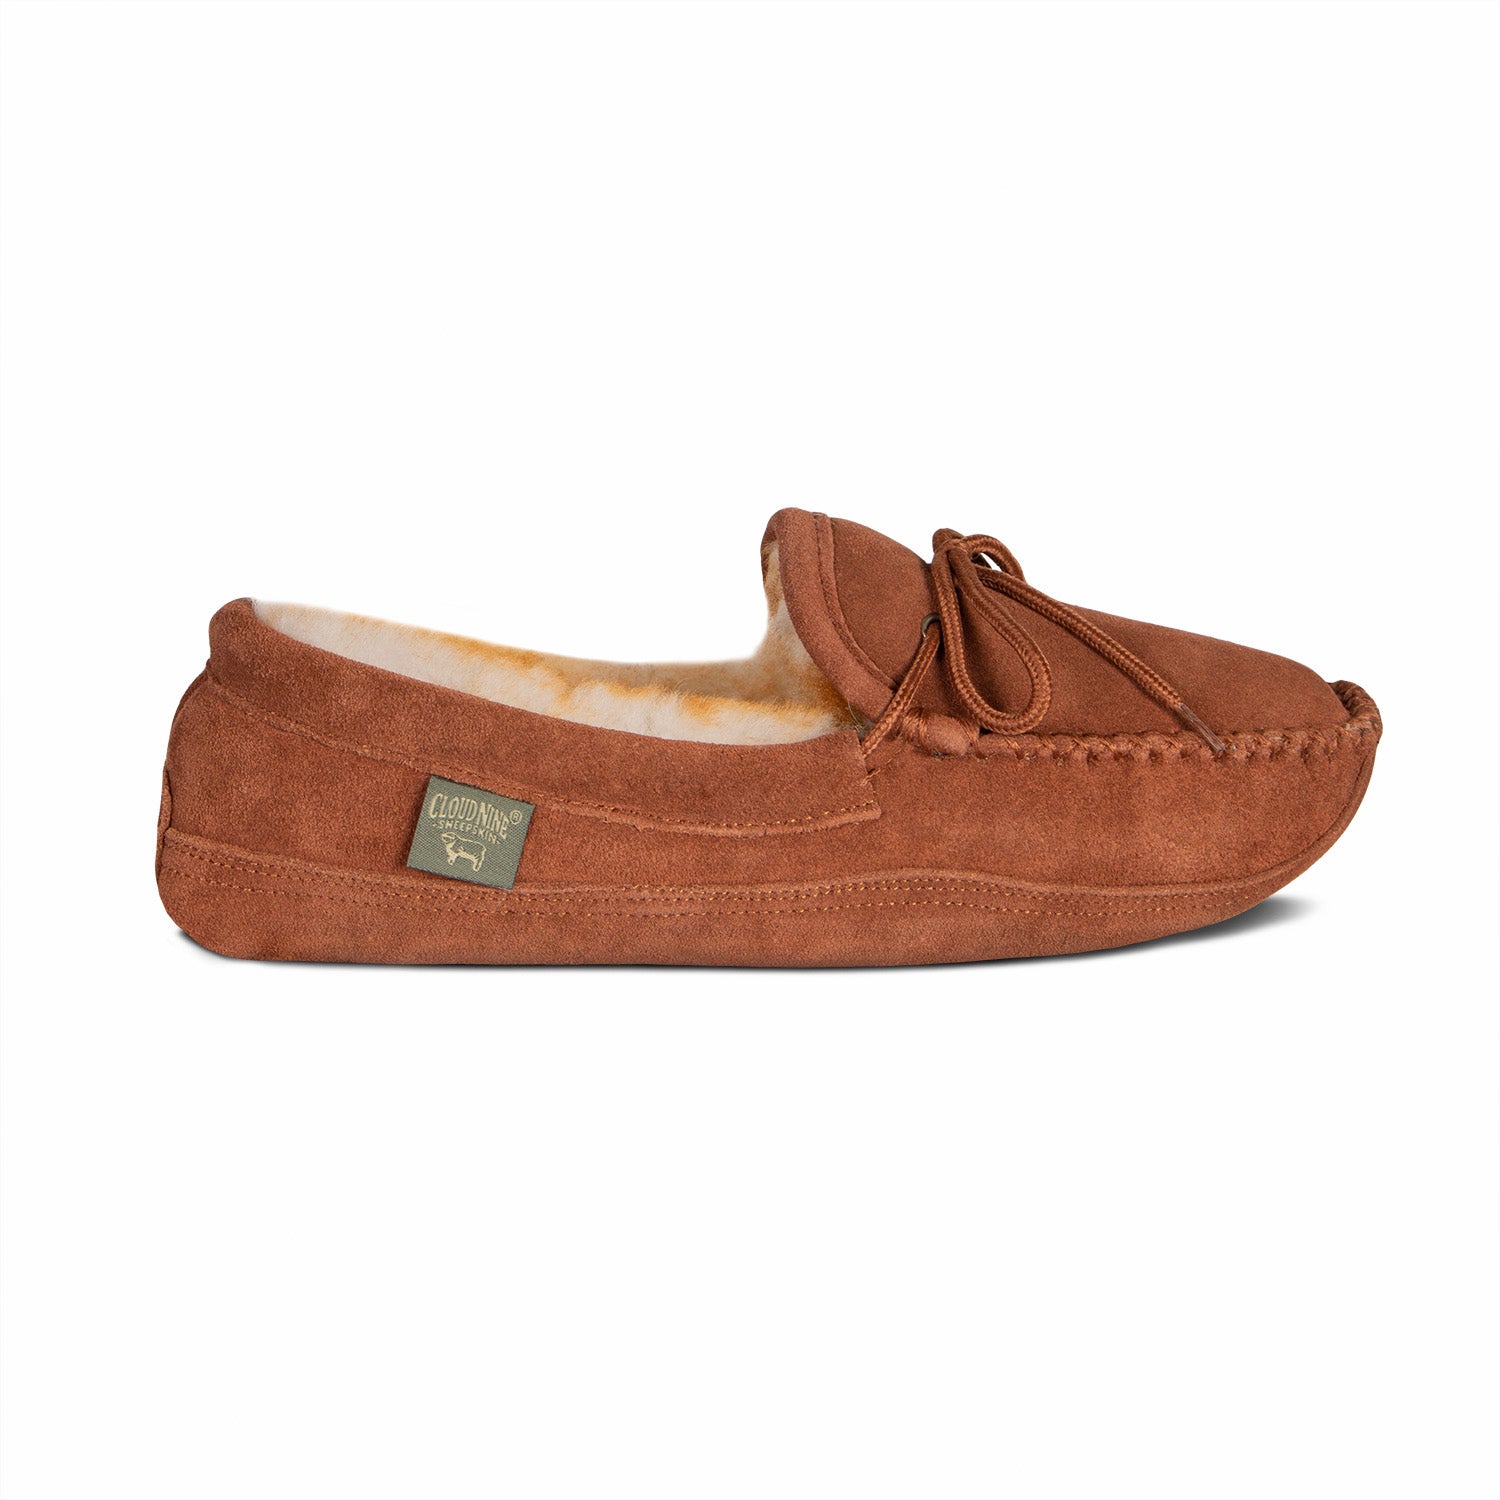 moccasin slippers no sole